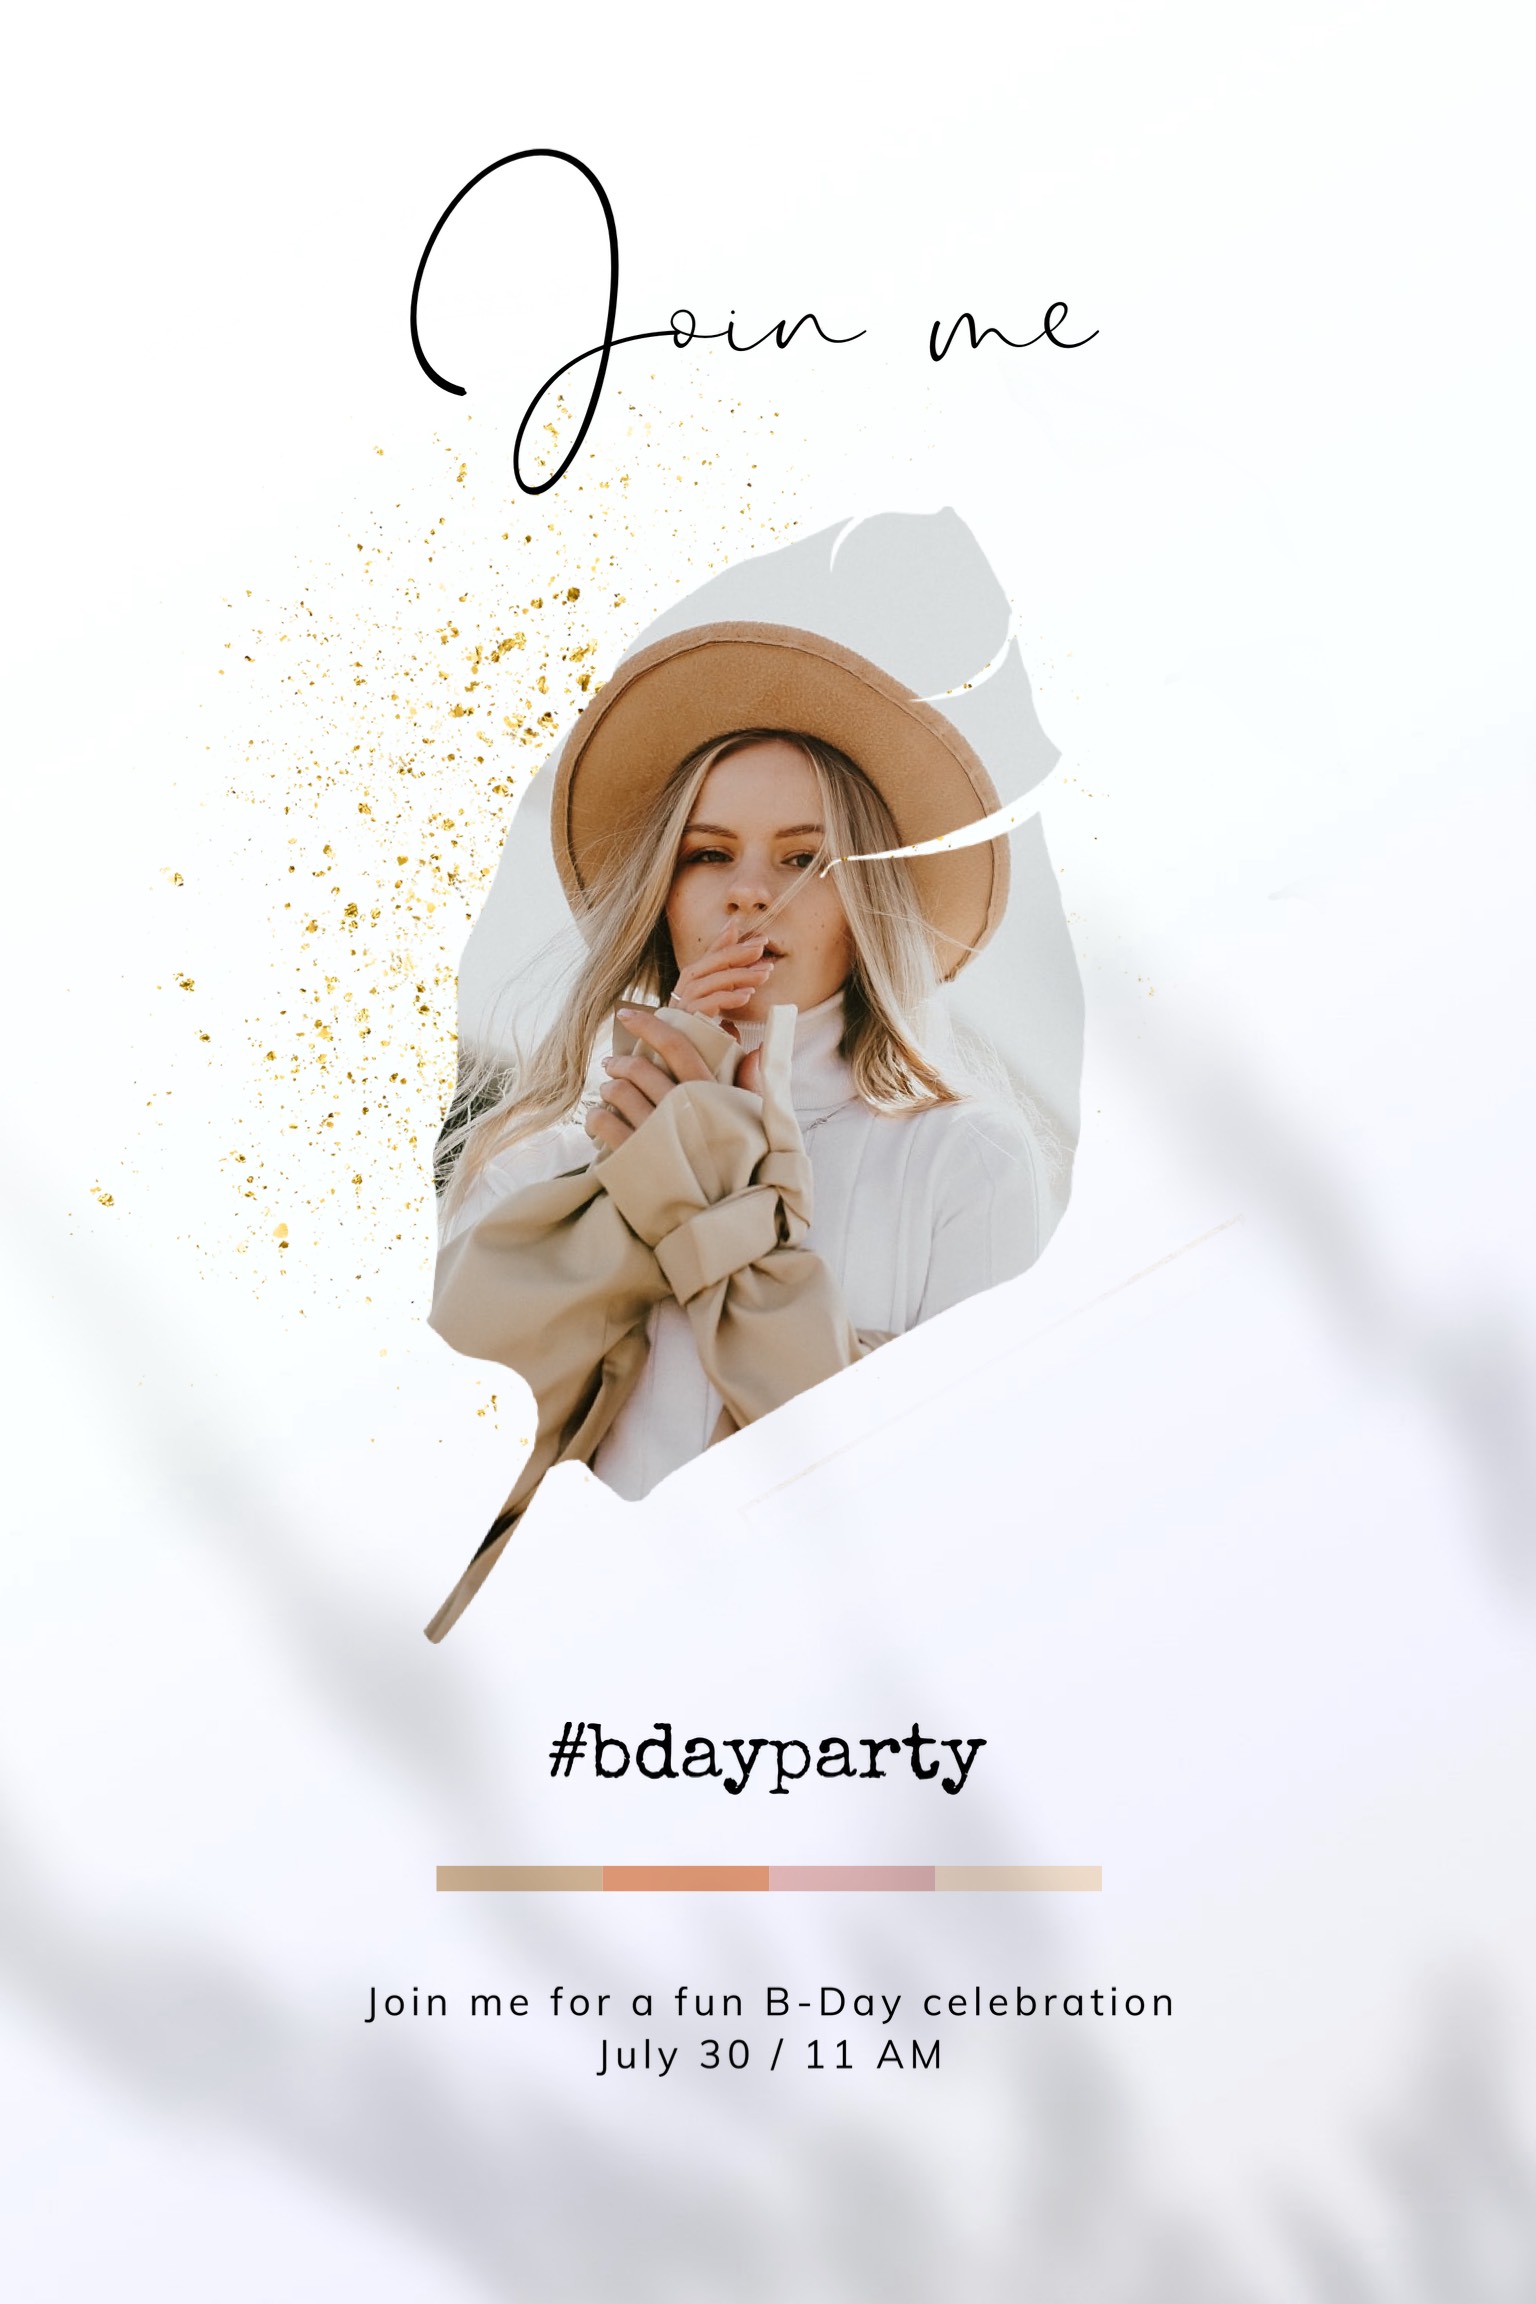 Join me party birthday invitation template